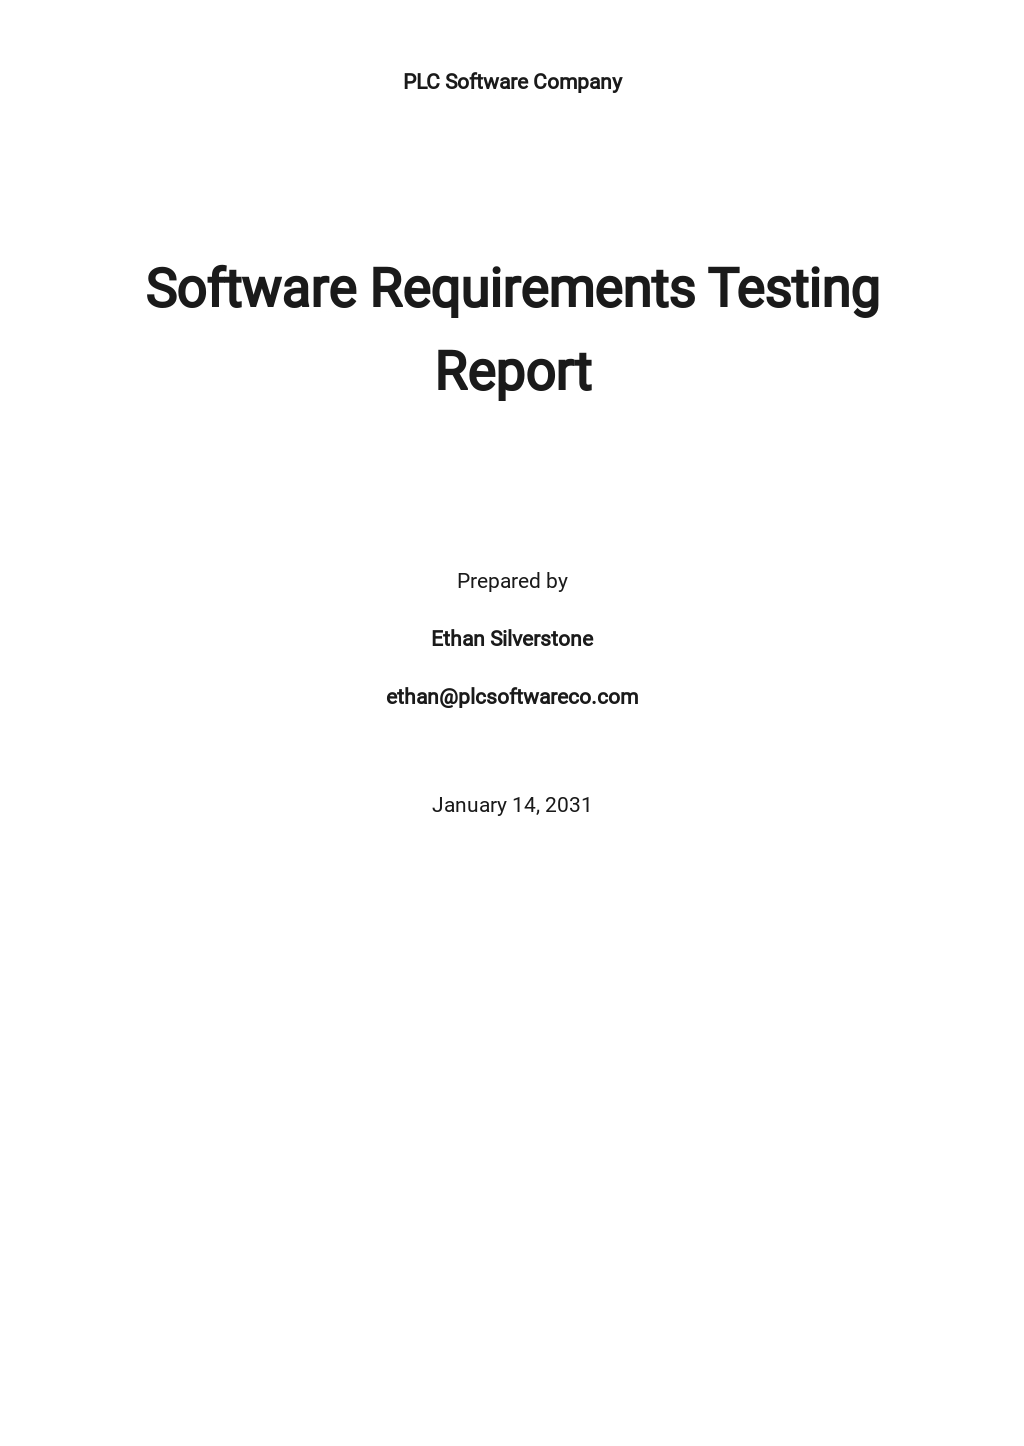 Requirements Testing Report Template.jpe